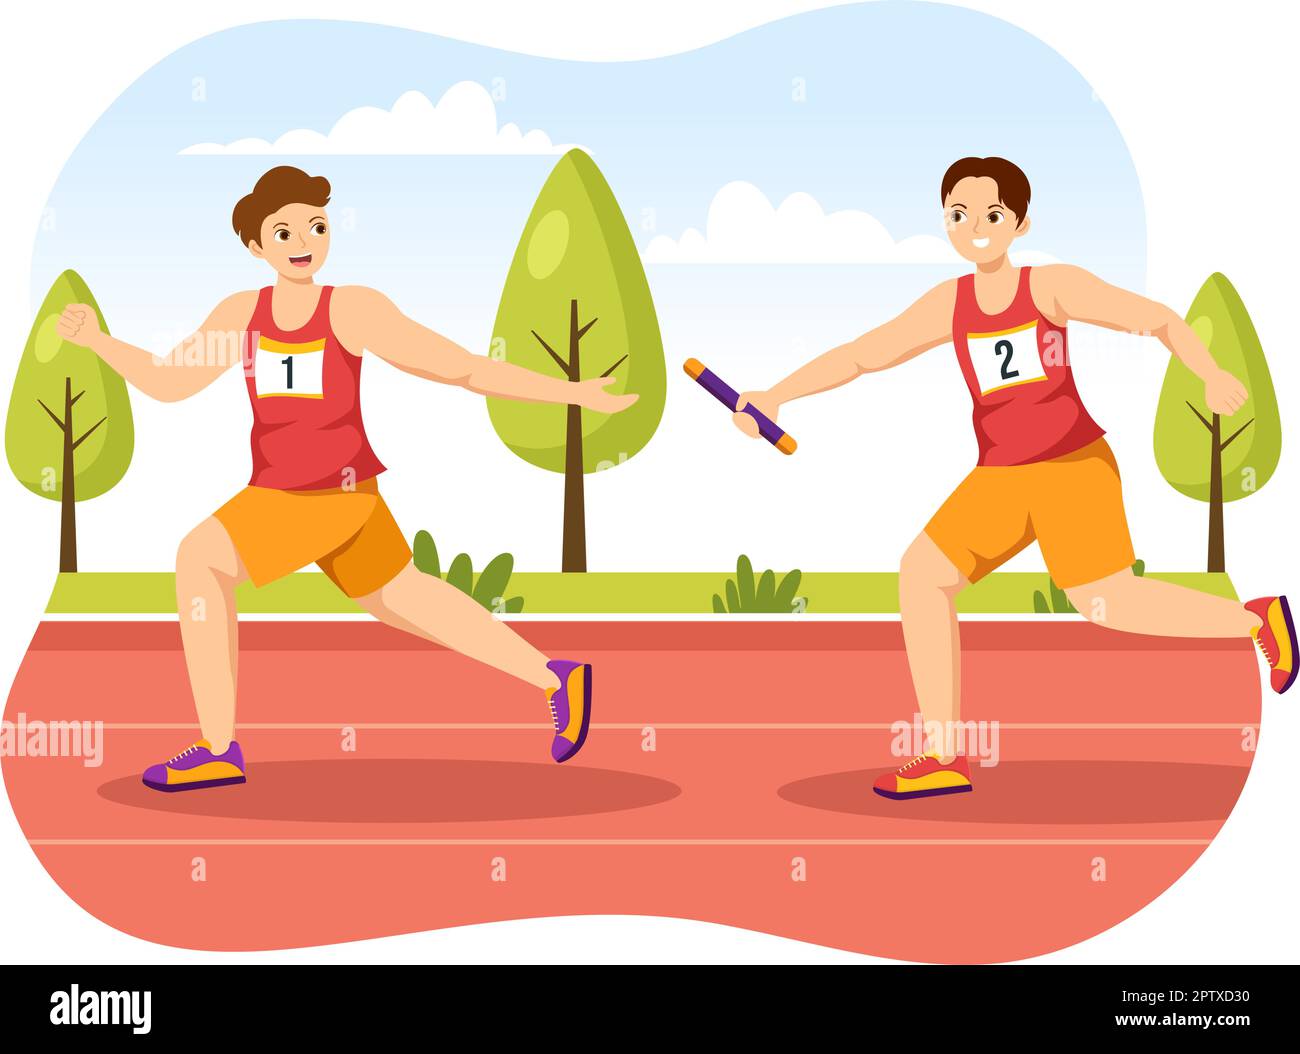 Relay Race Illustration by Passing the Baton to Teammates Until Reaching the Finish Line in a Sports Championship Flat Cartoon Hand Drawing Template Stock Vector